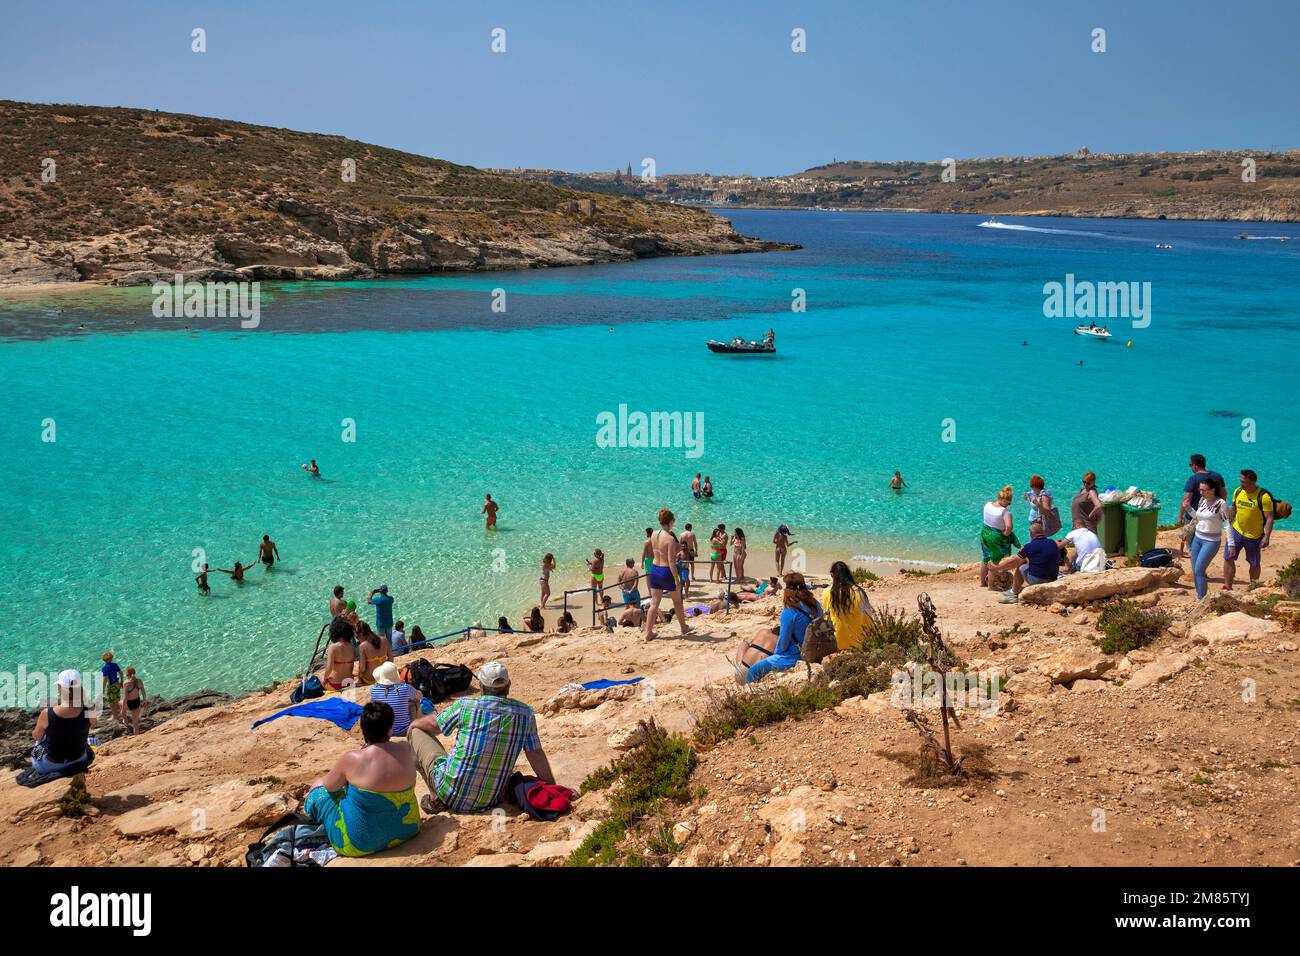 Tourists bathing in the Blue Lagoon, in the background the island of Gozo, Comino, Malta, Europe Stock Photo